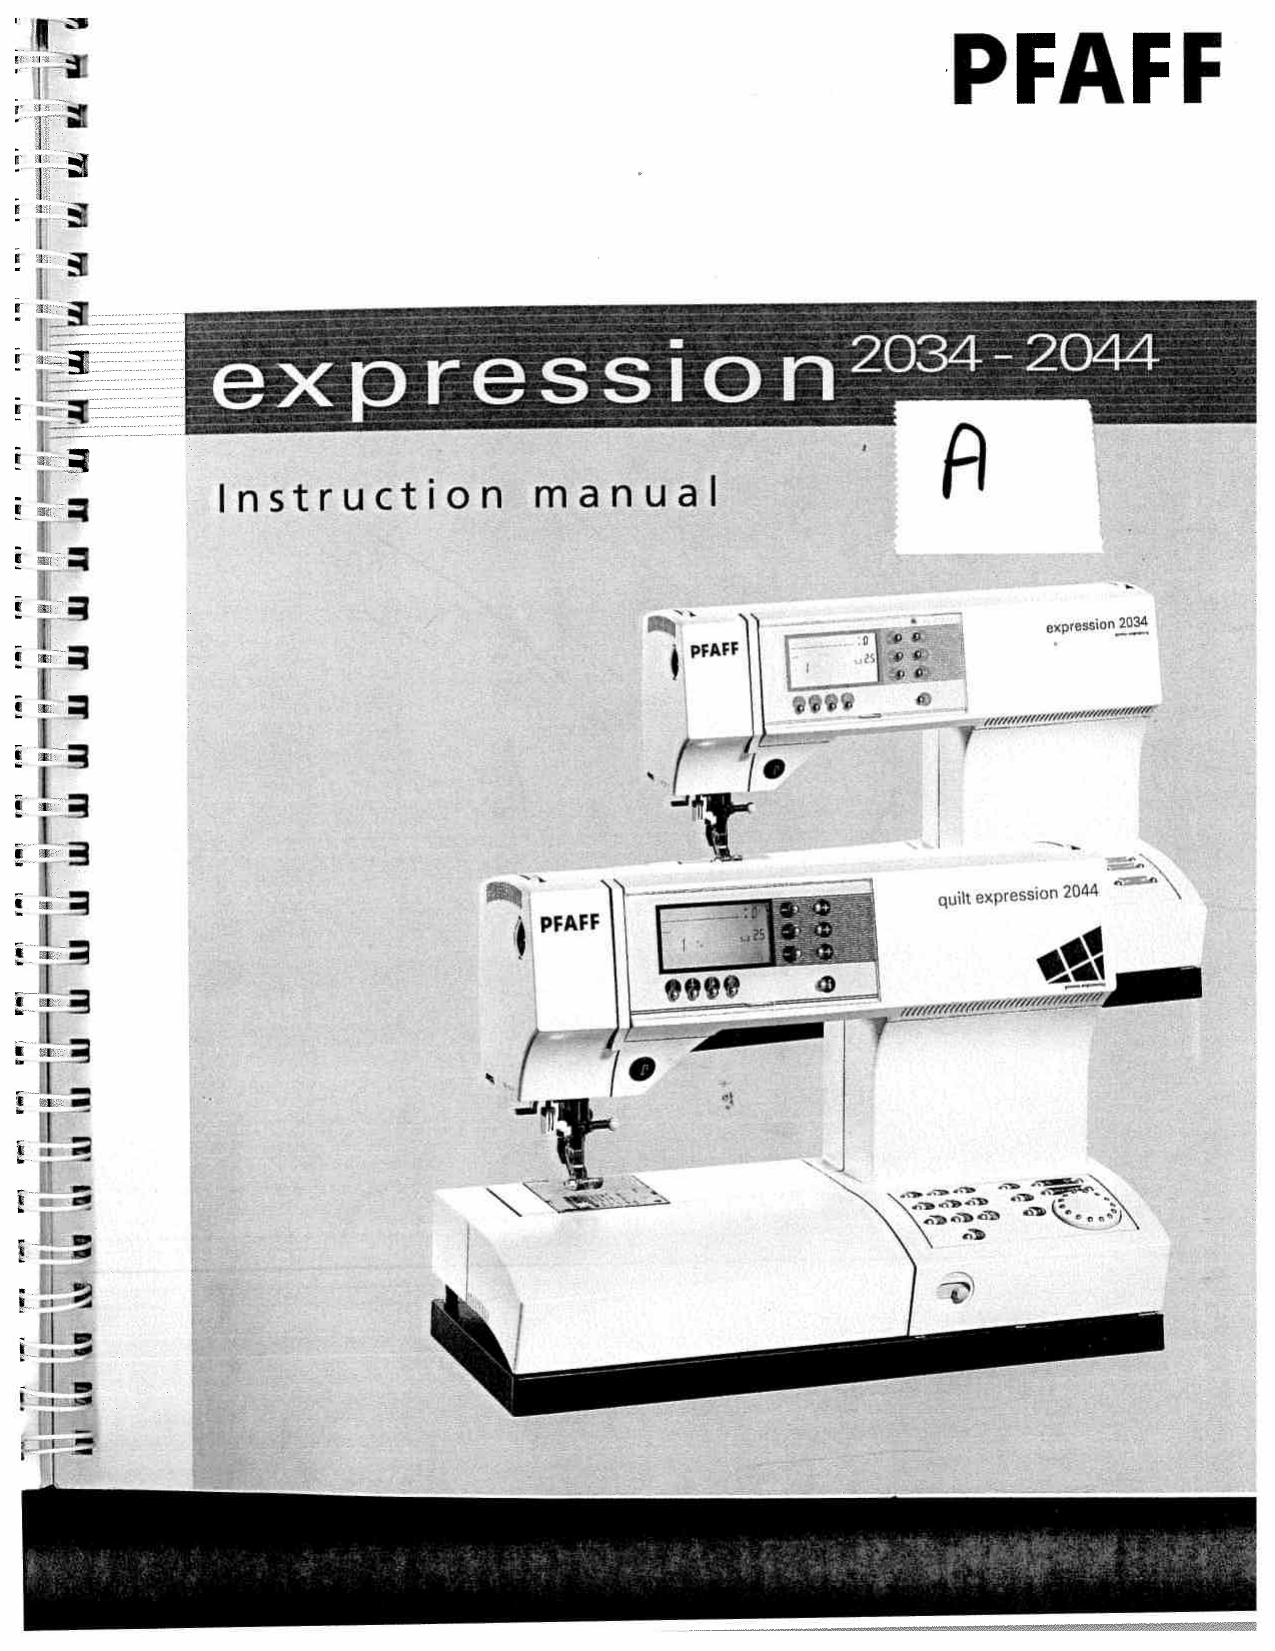 Pfaff expression 2034, 2036, 2038,  2040, 2042, 2044 instruction manual Preview image 6